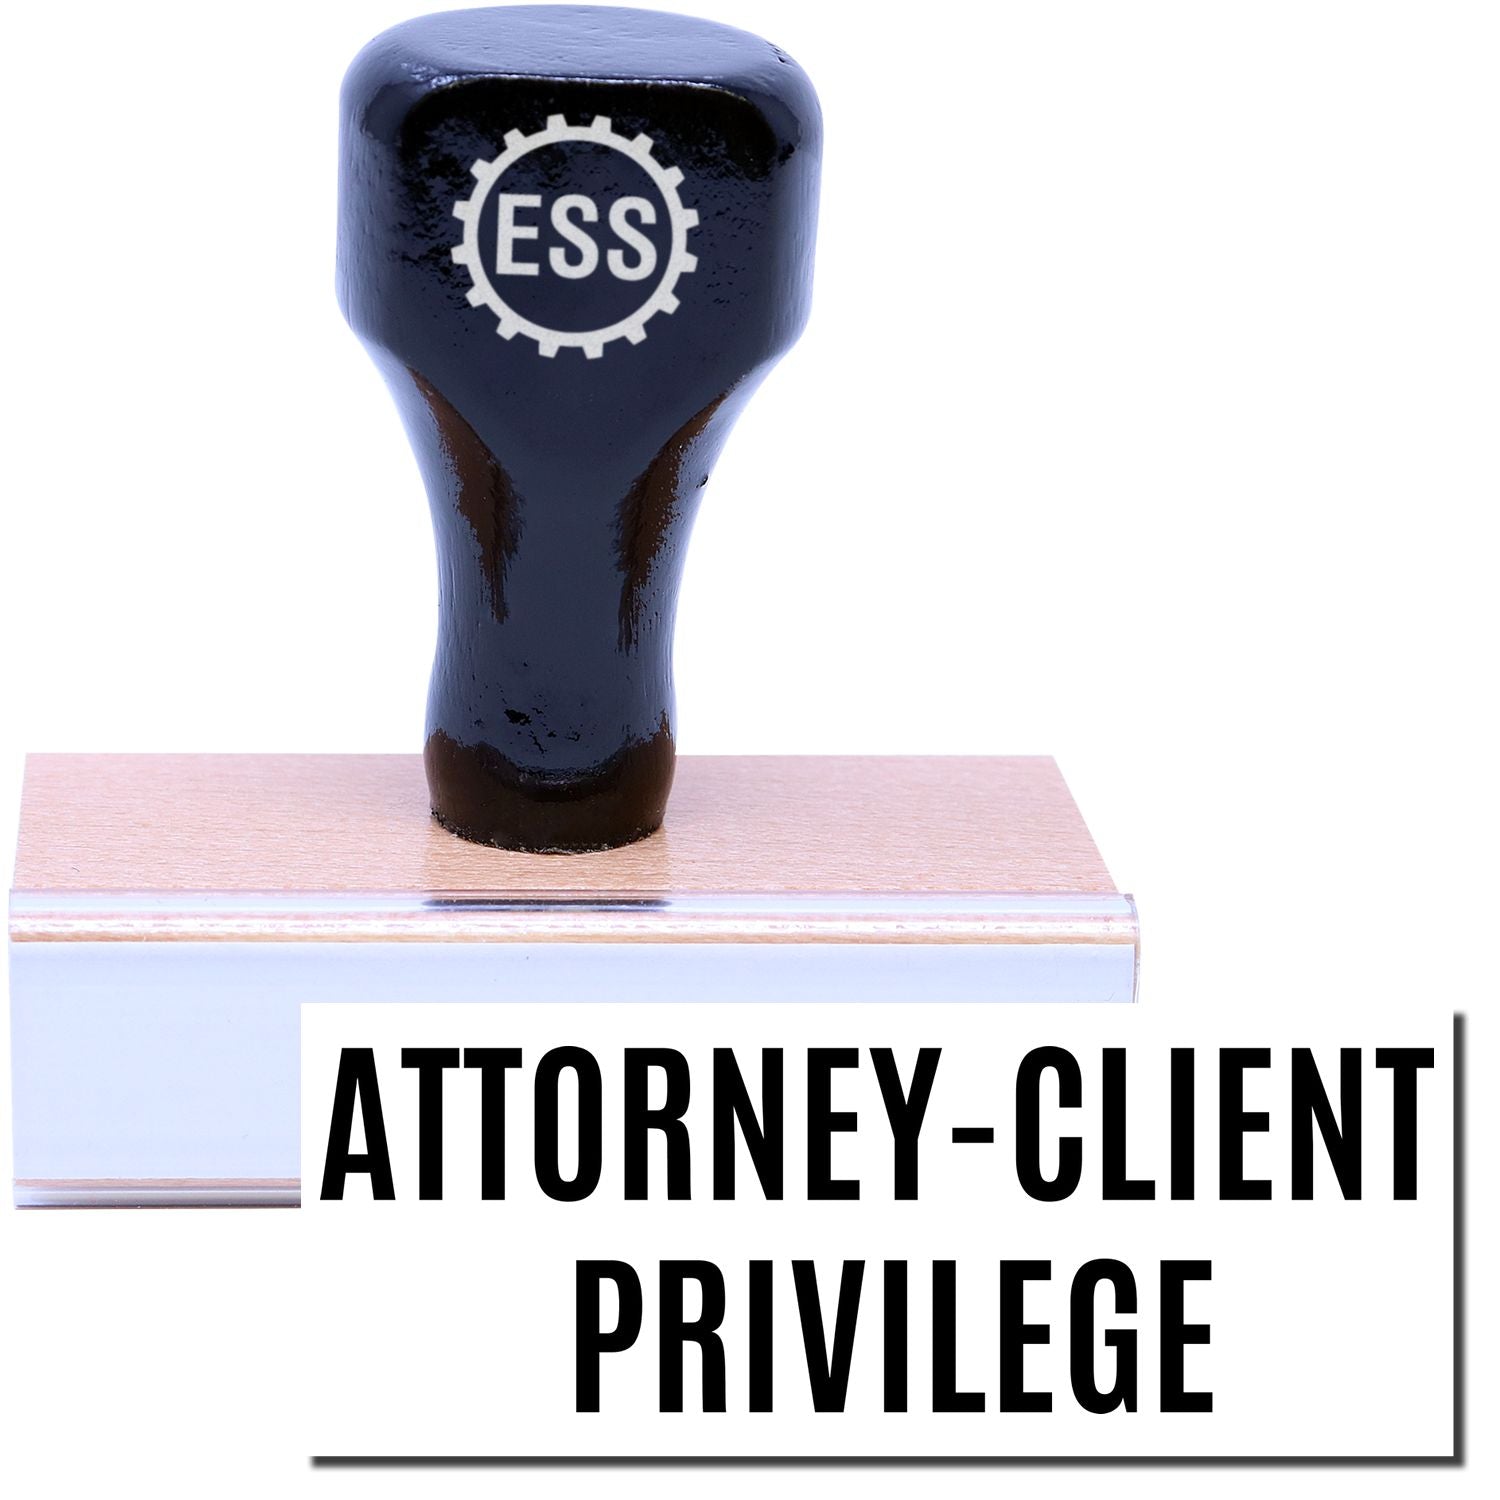 A stock office rubber stamp with a stamped image showing how the text "ATTORNEY-CLIENT PRIVILEGE" is displayed after stamping.